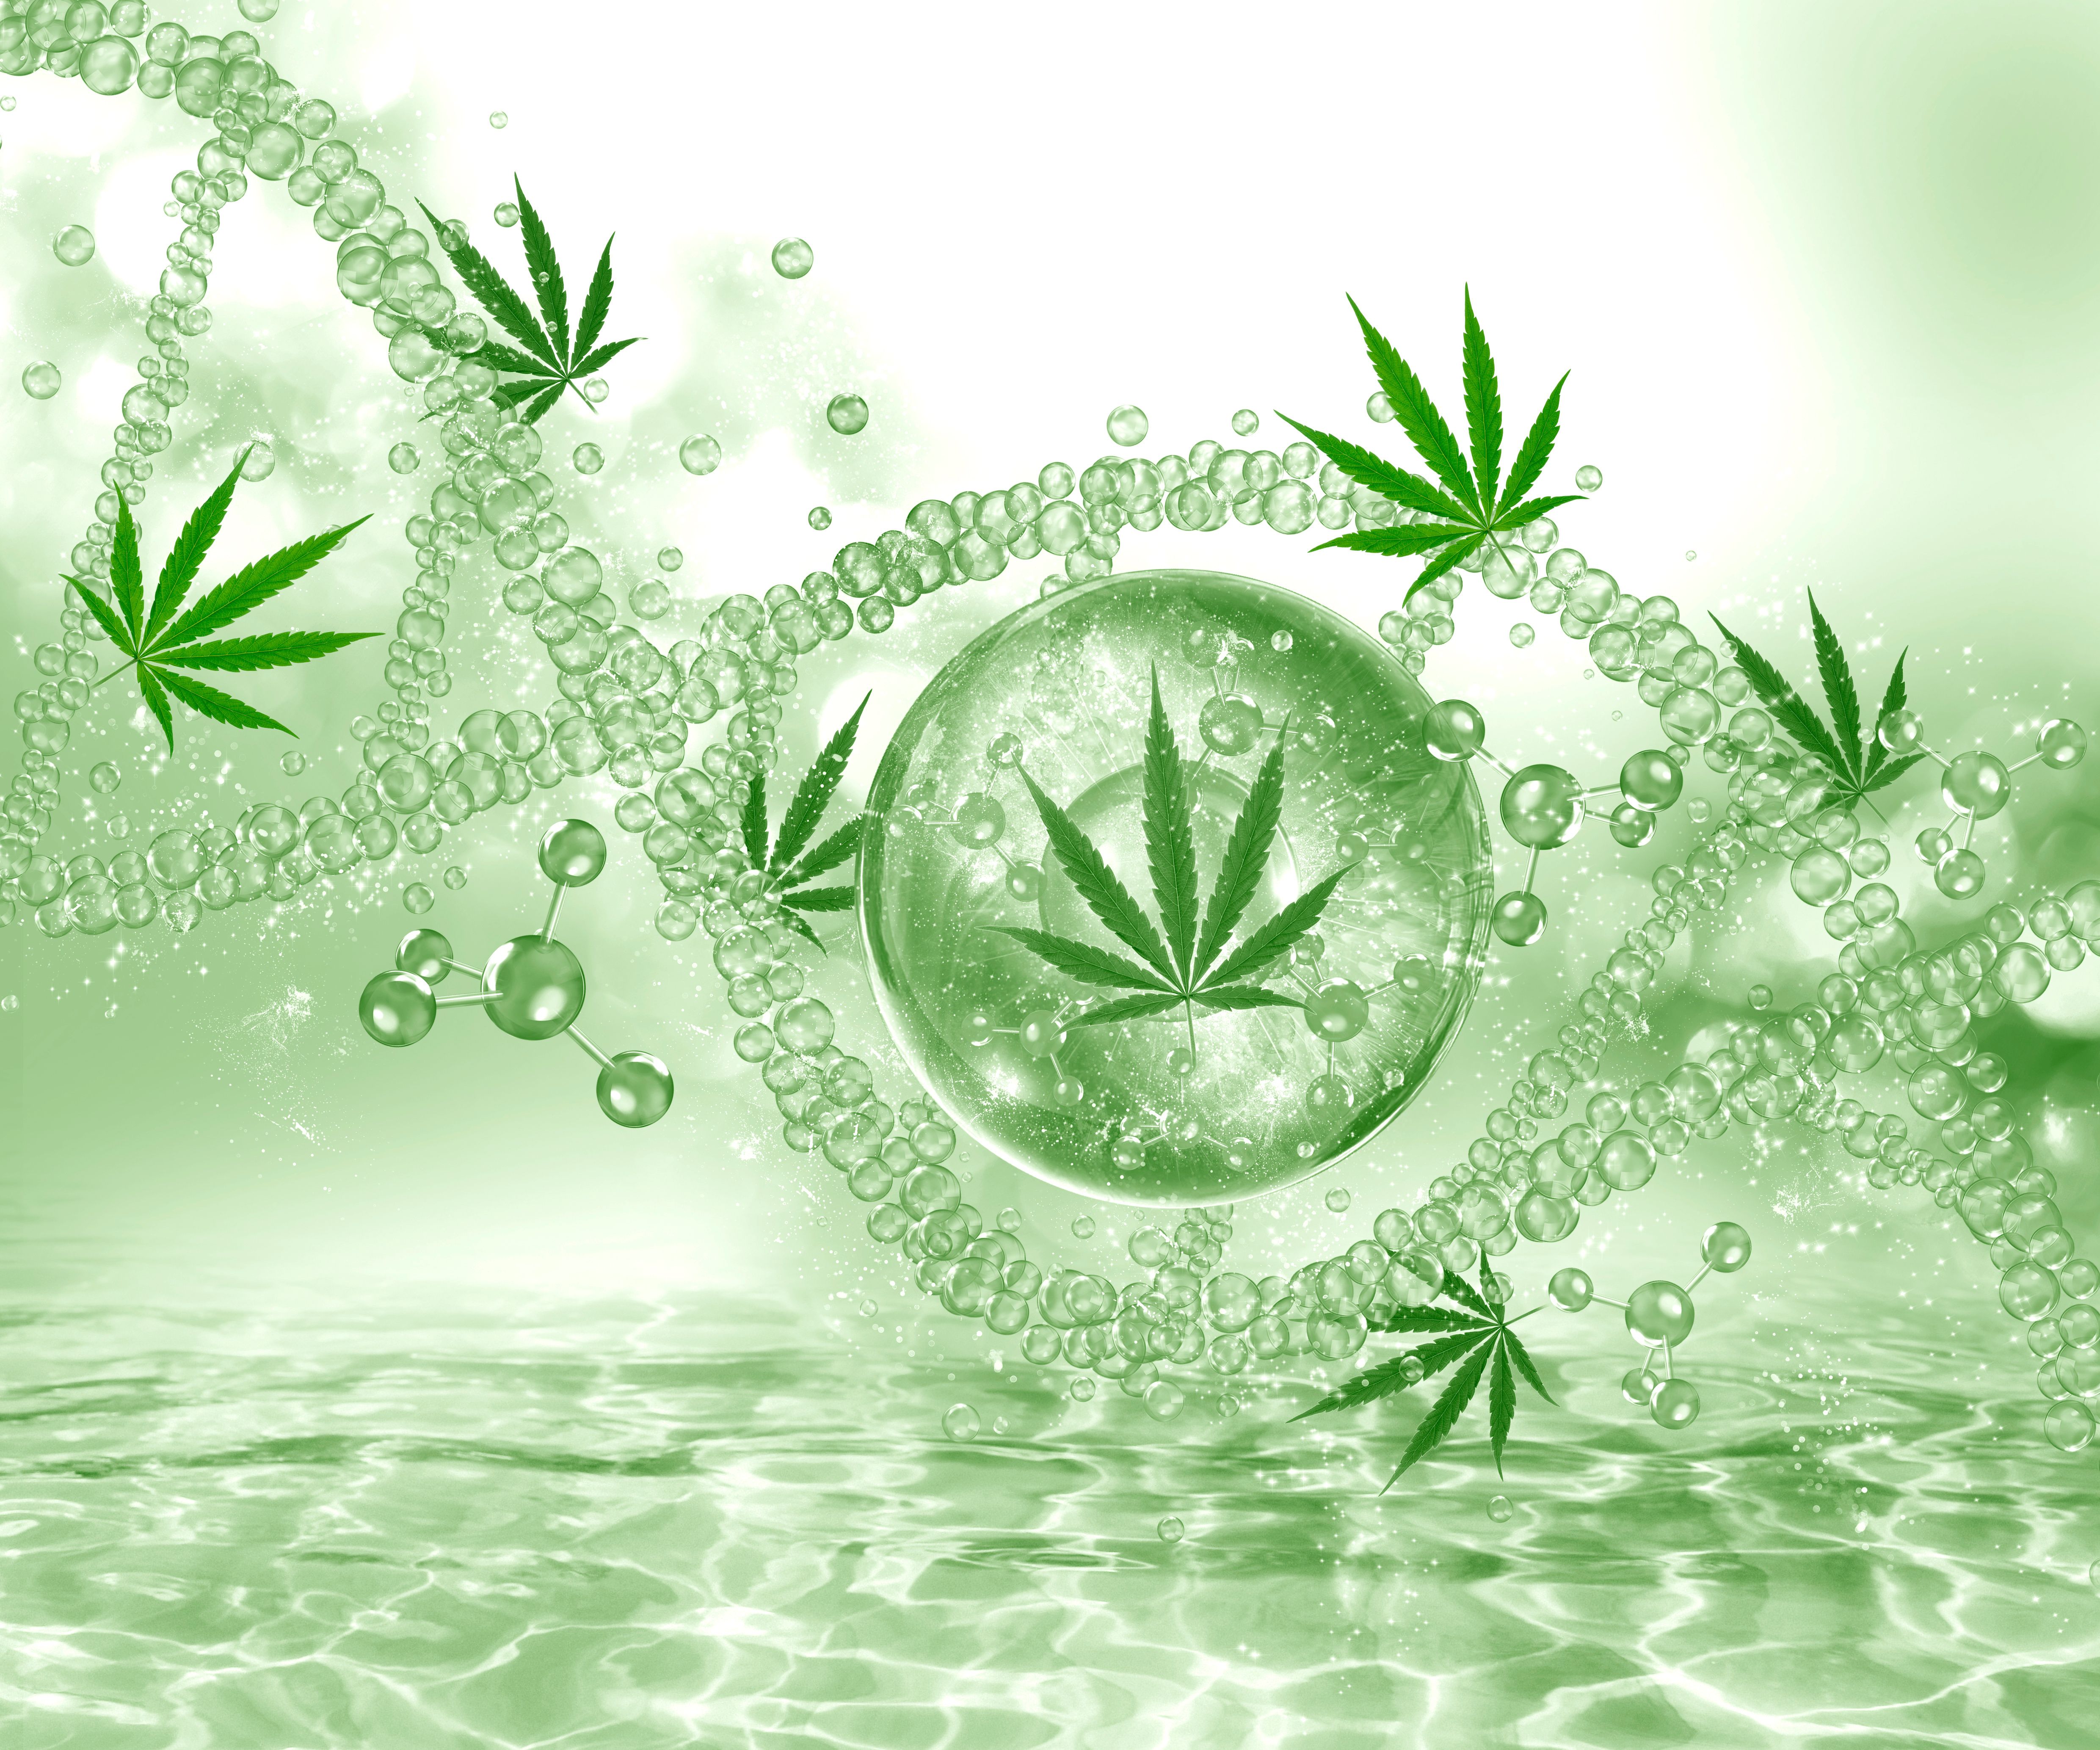 Cannabis molecule with bubbles and cannabis leaves